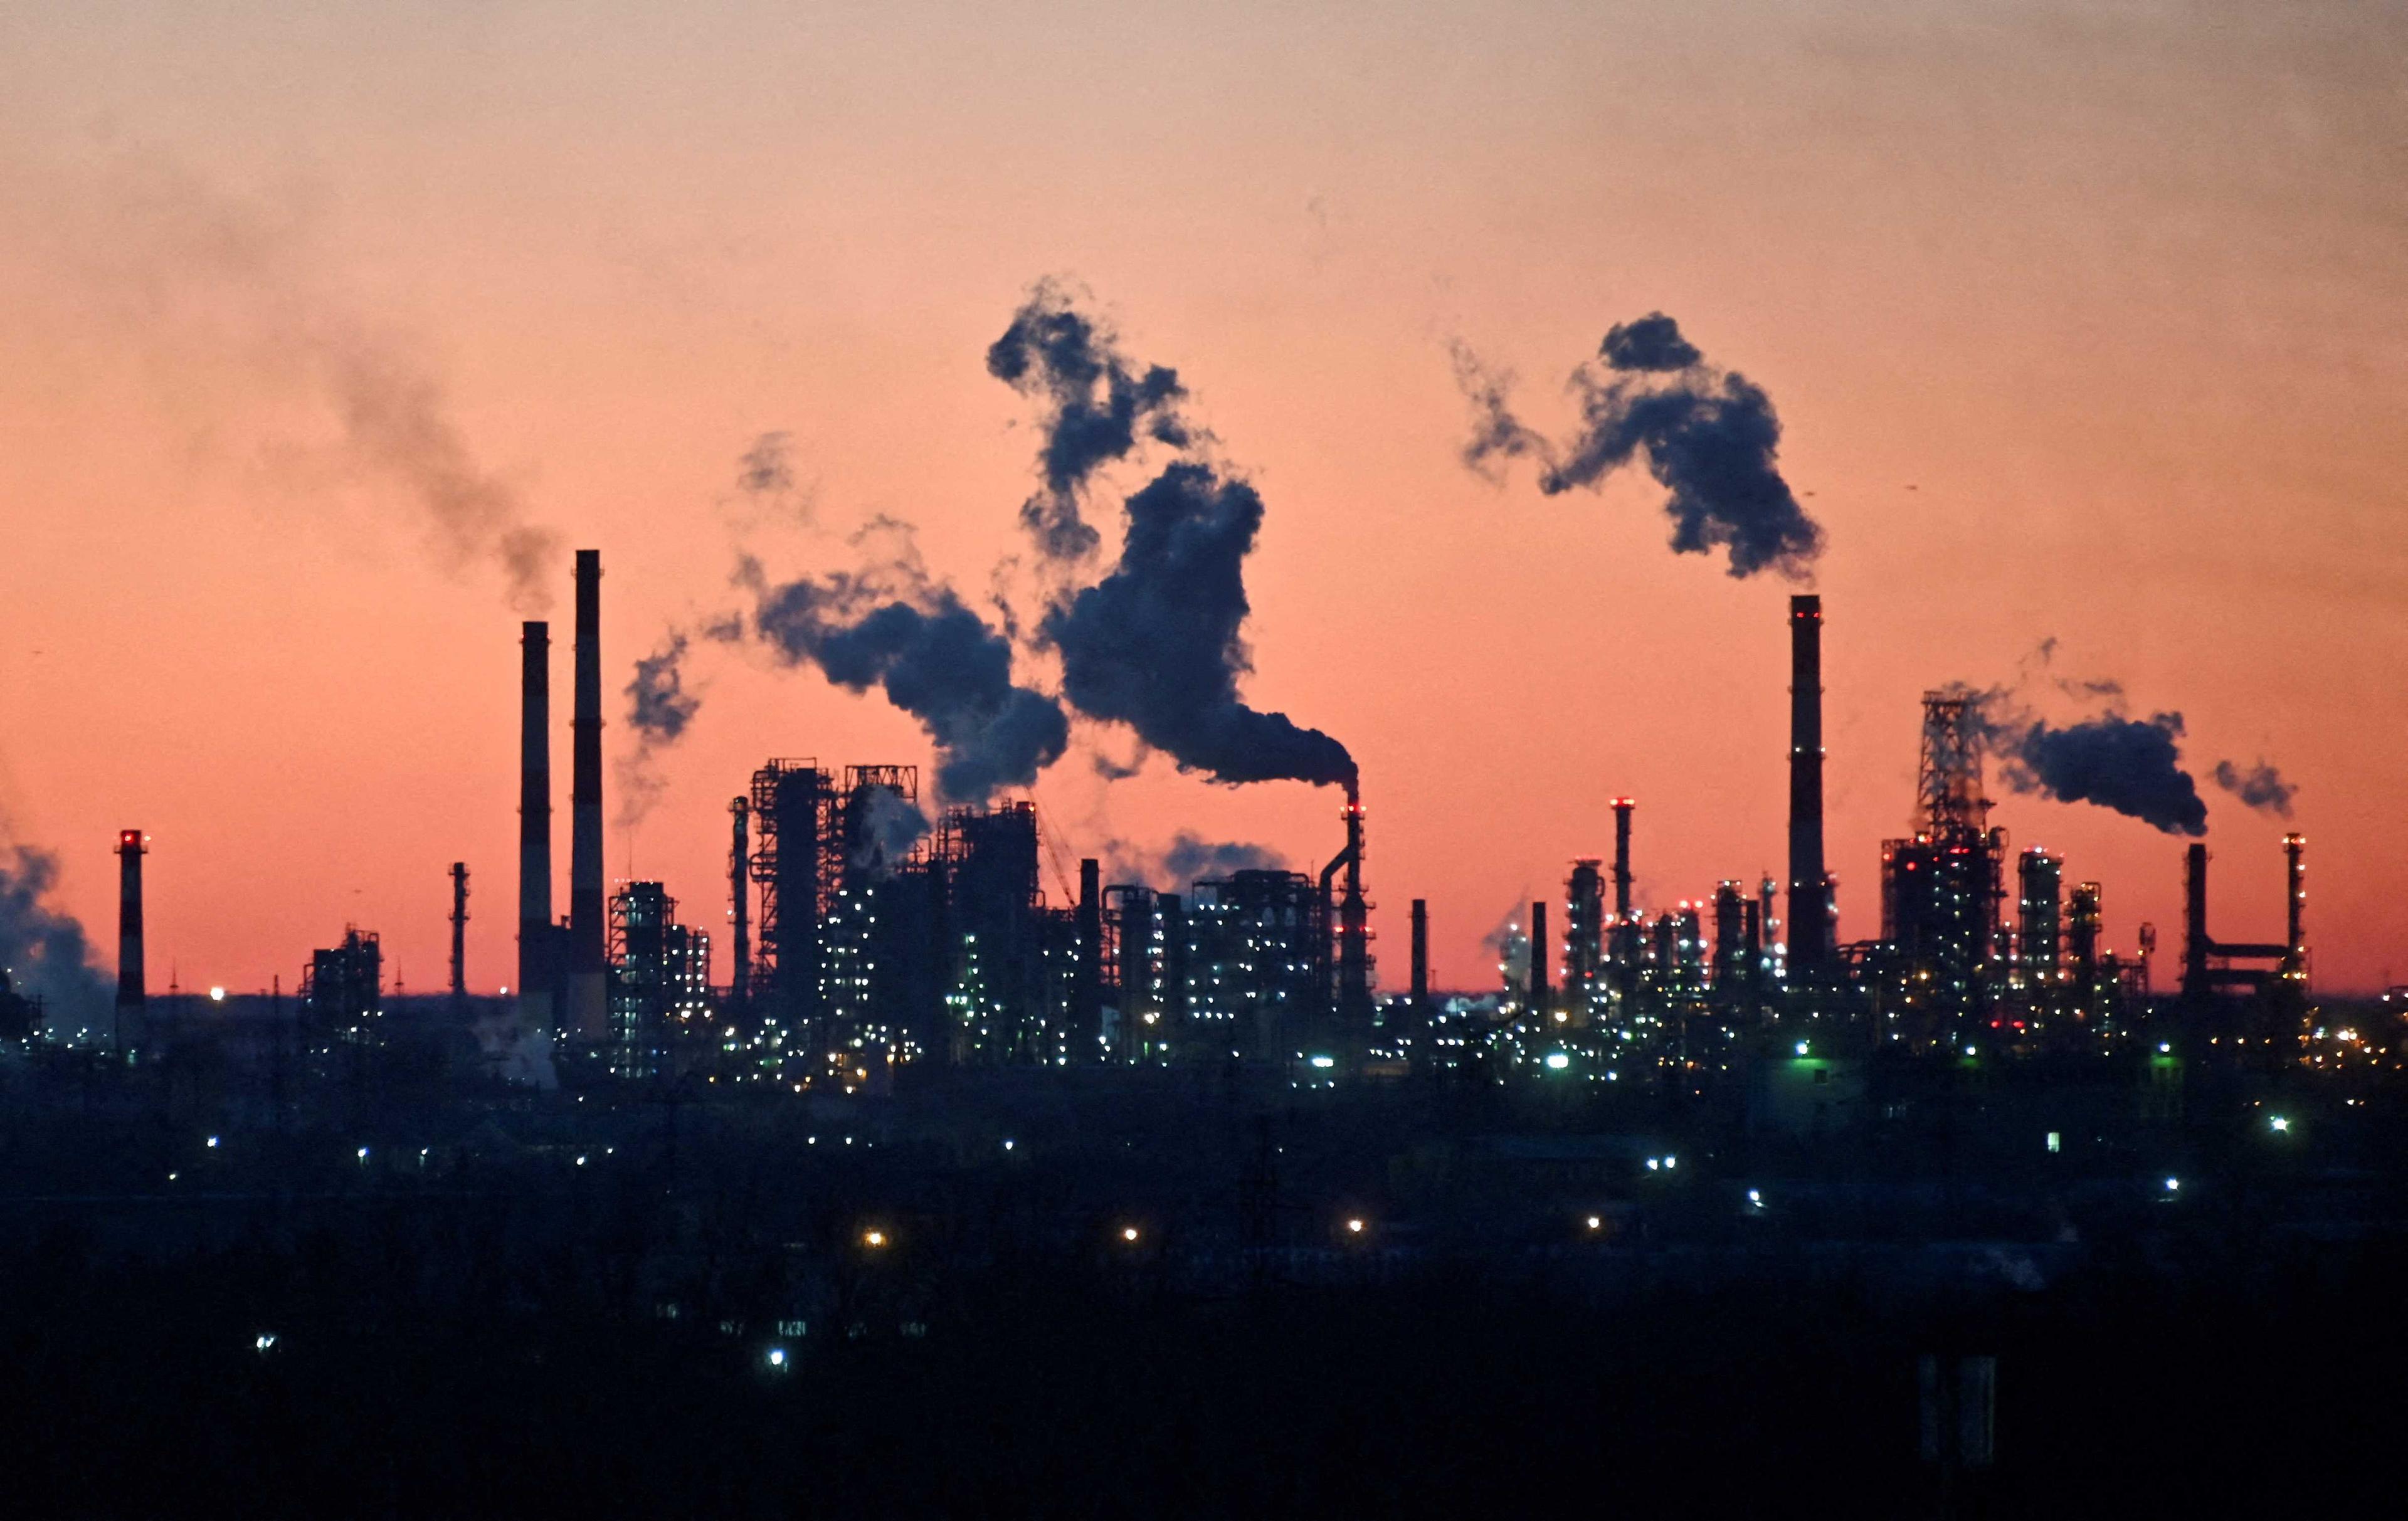 A general view shows a local oil refinery during sunset in Omsk, Russia March 16, 2022. Photo: Reuters